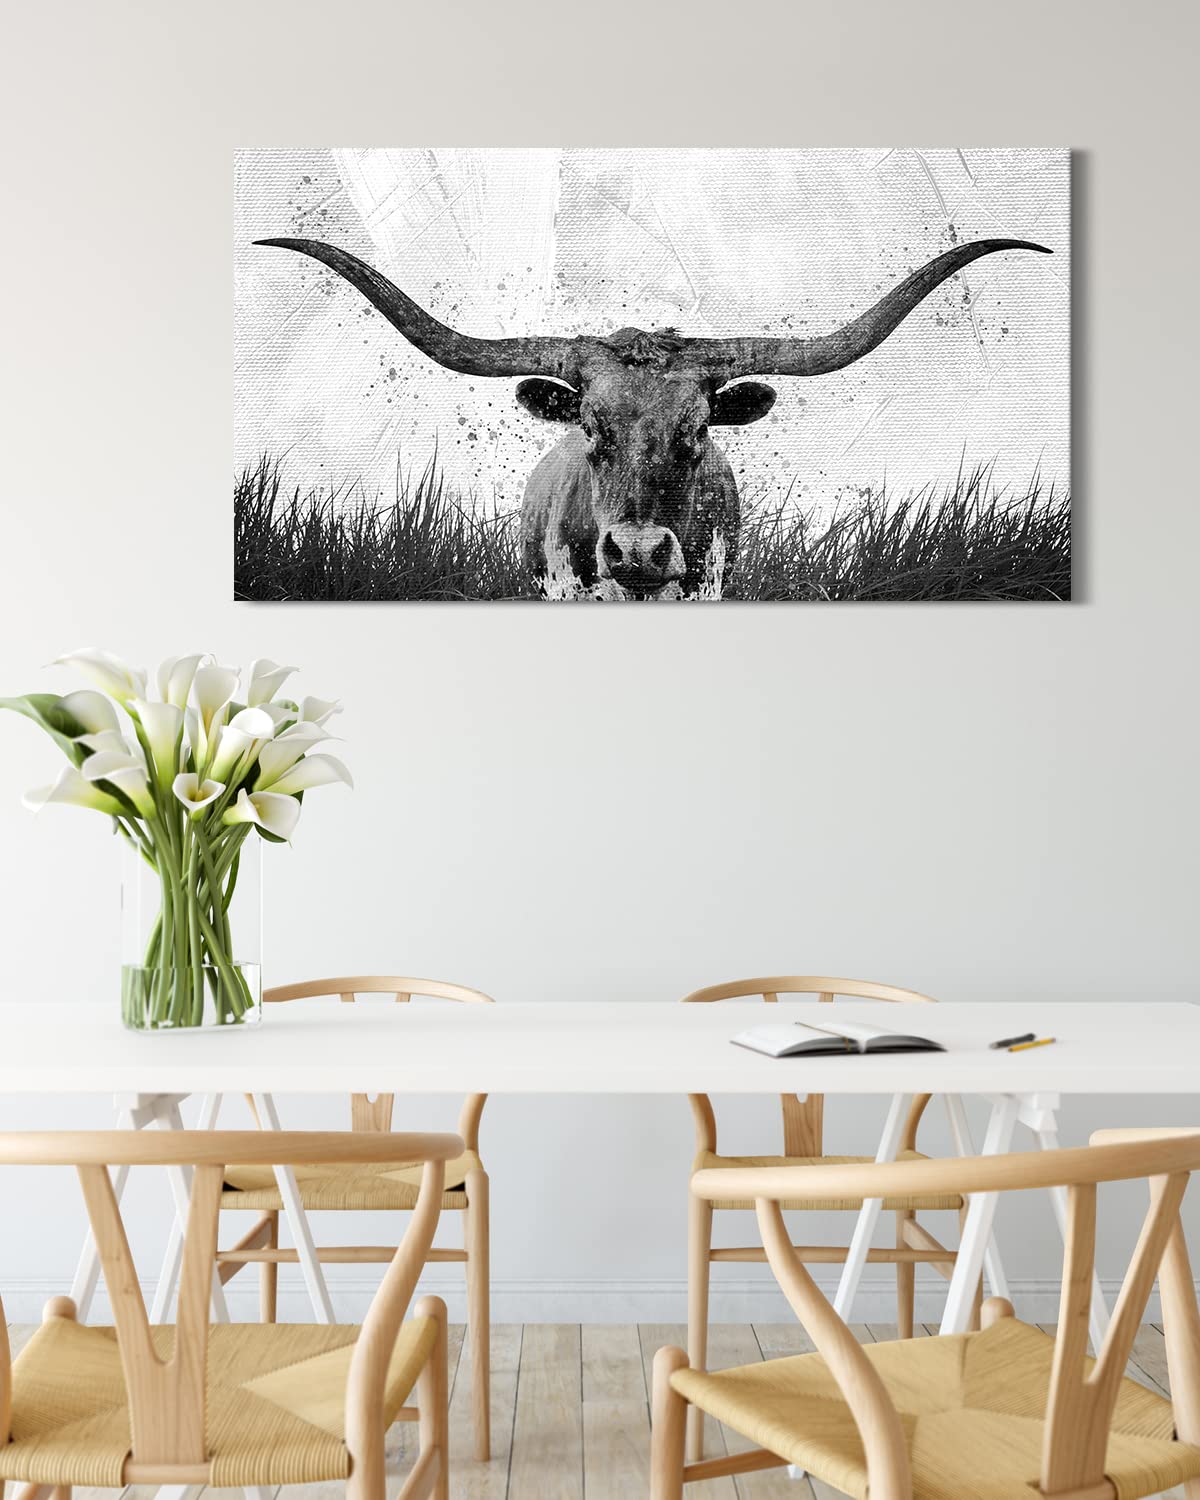 Govivo Longhorn Wall Art - Rustic Farmhouse Decor - Cowboy and Western Decor - Ranch Style Decor for the Home - Western Decorations for Home - Minimalist Wall Art